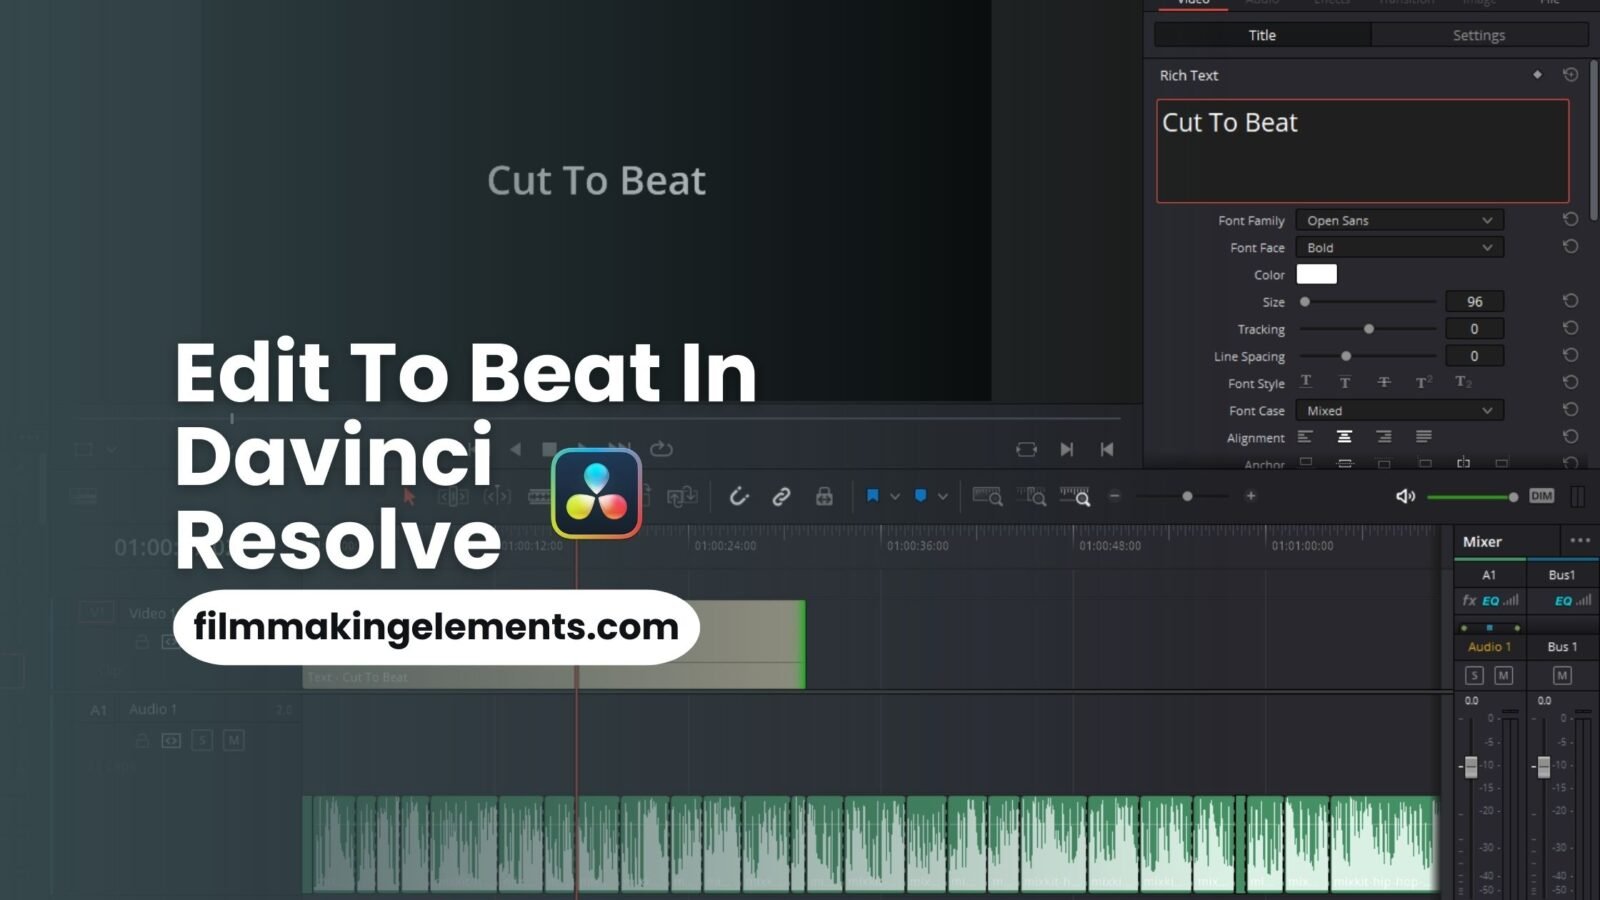 How To Edit To Beat In Davinci Resolve: Step-By-Step Guide